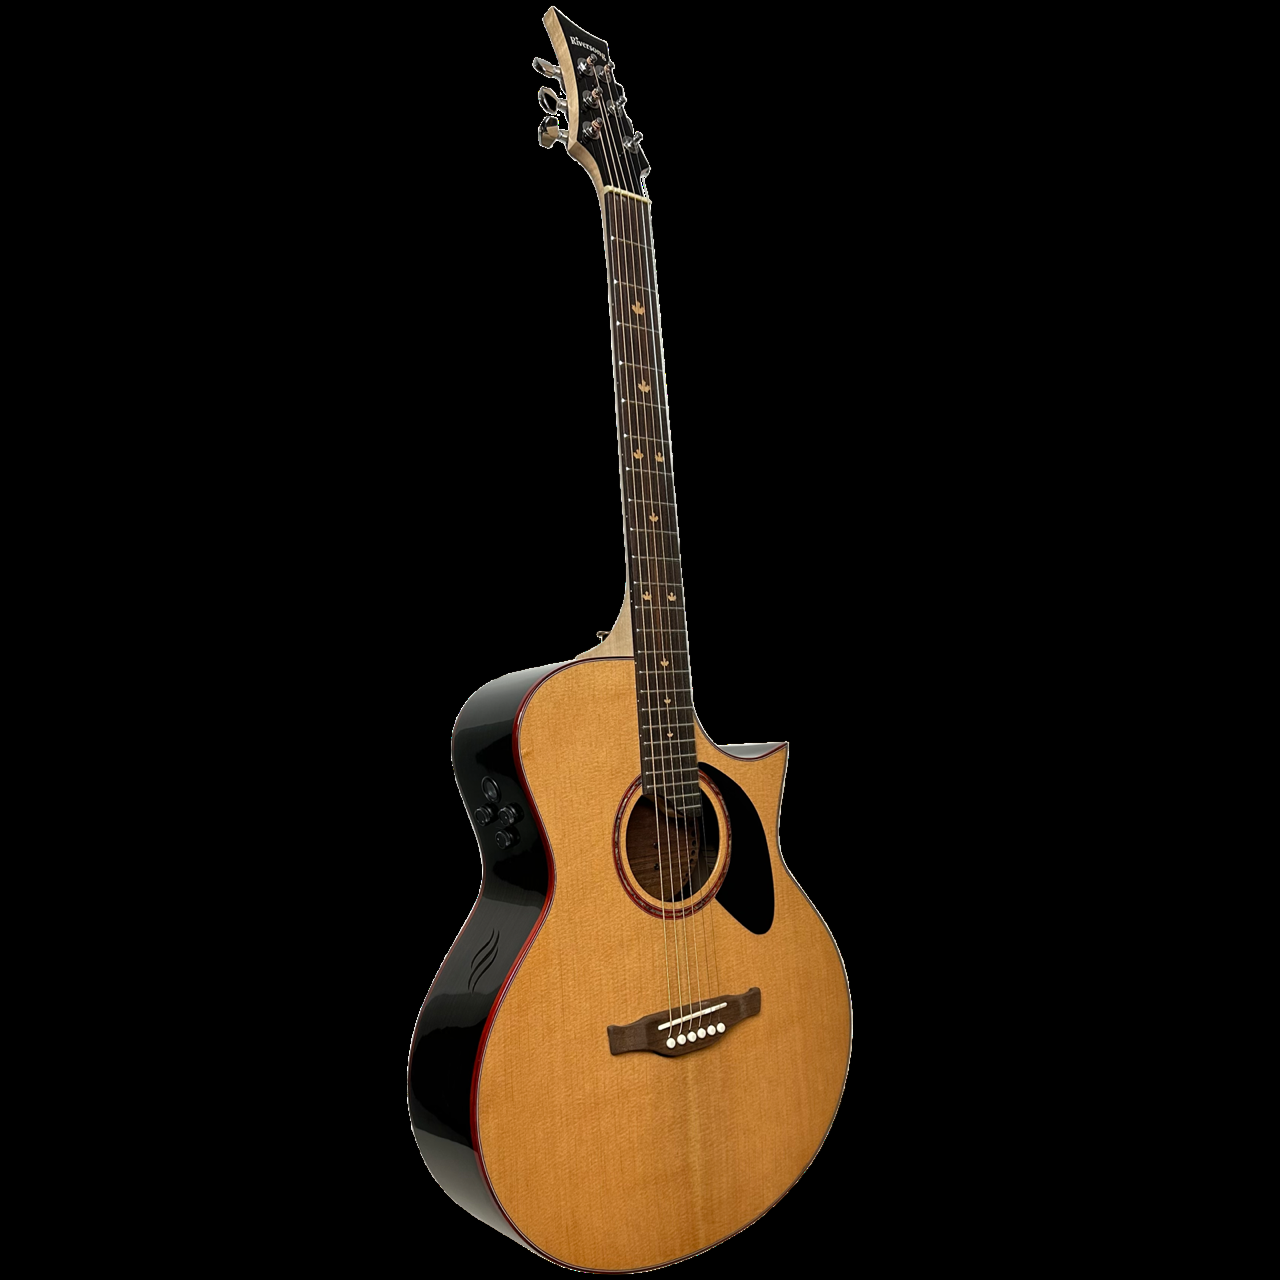 Riversong Stylist Deluxe (Stylist Dlx) Acoustic Guitar